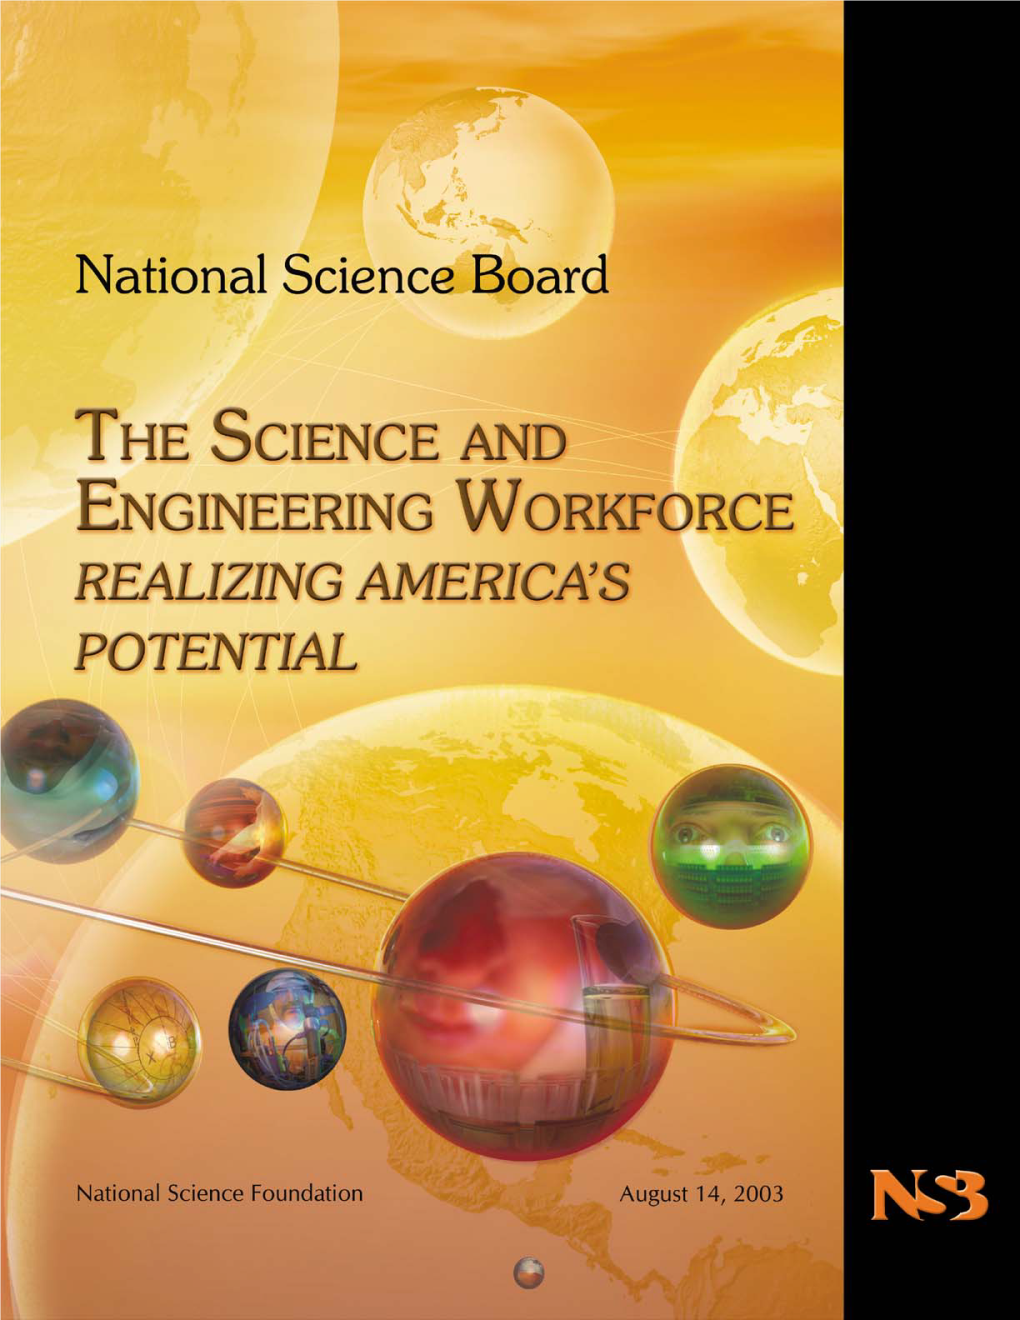 The Science and Engineering Workforce: Realizing America's